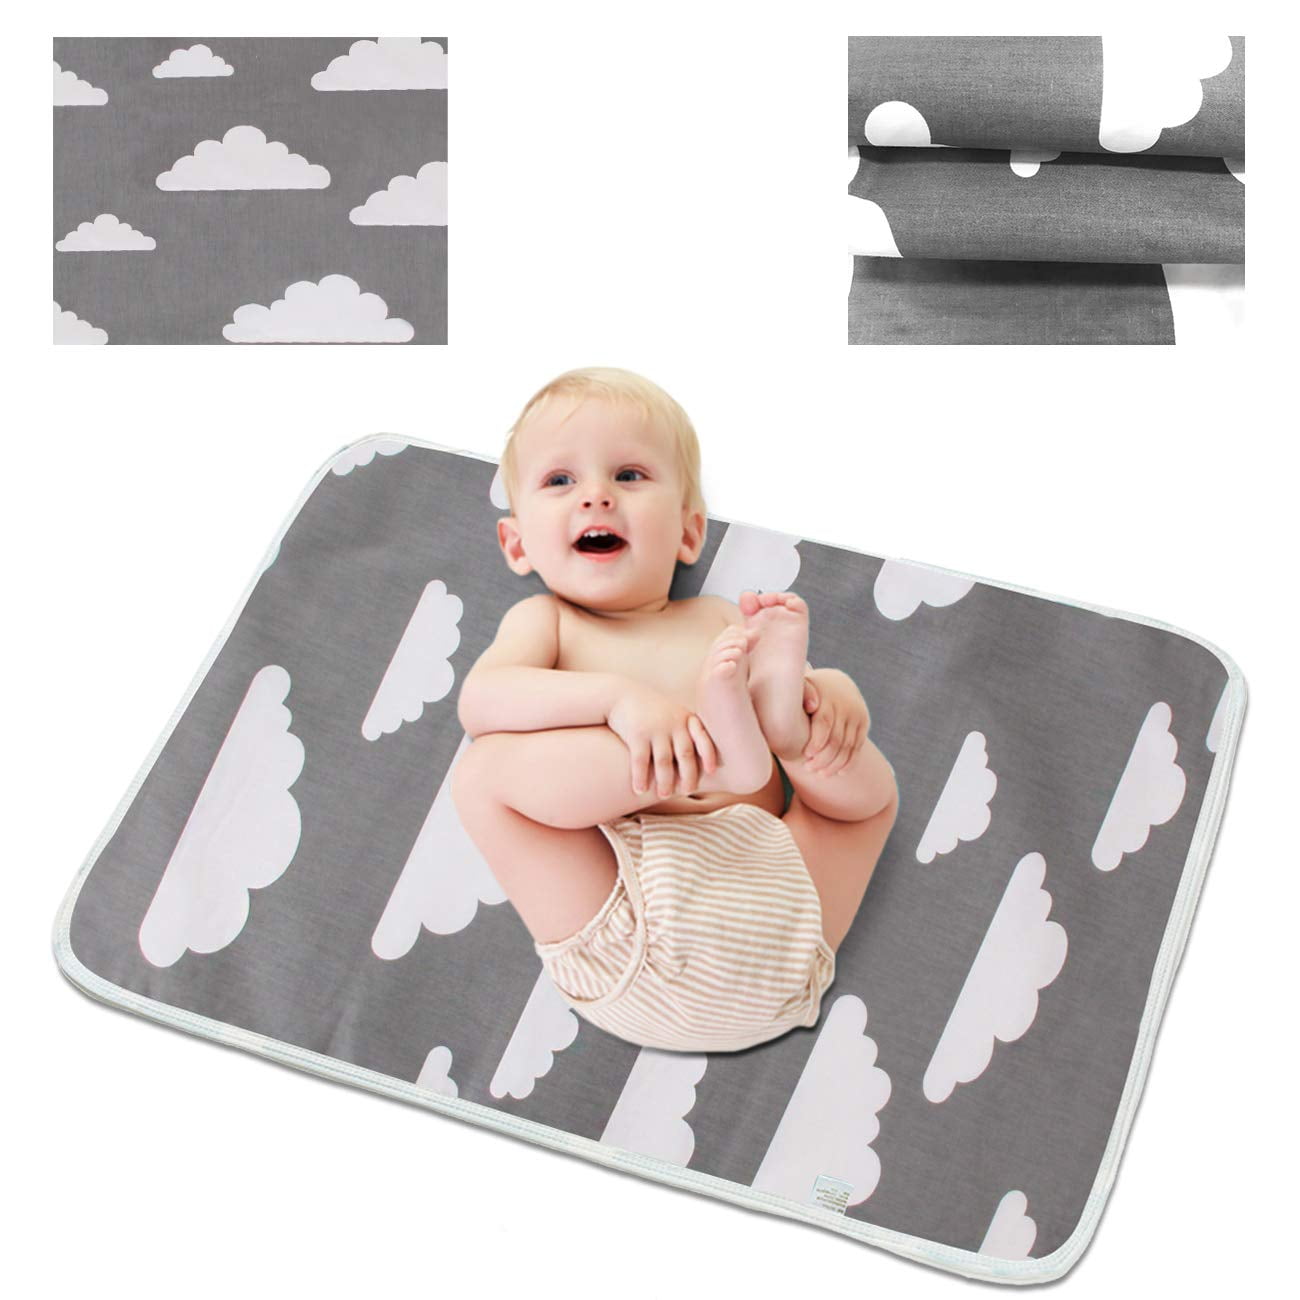 Back Packers Diaper Changing Pad 3 pcs Ecological Cotton Breathable Multi-Function Waterproof Changing Pads Washable Resuable Diapers Liners Mat